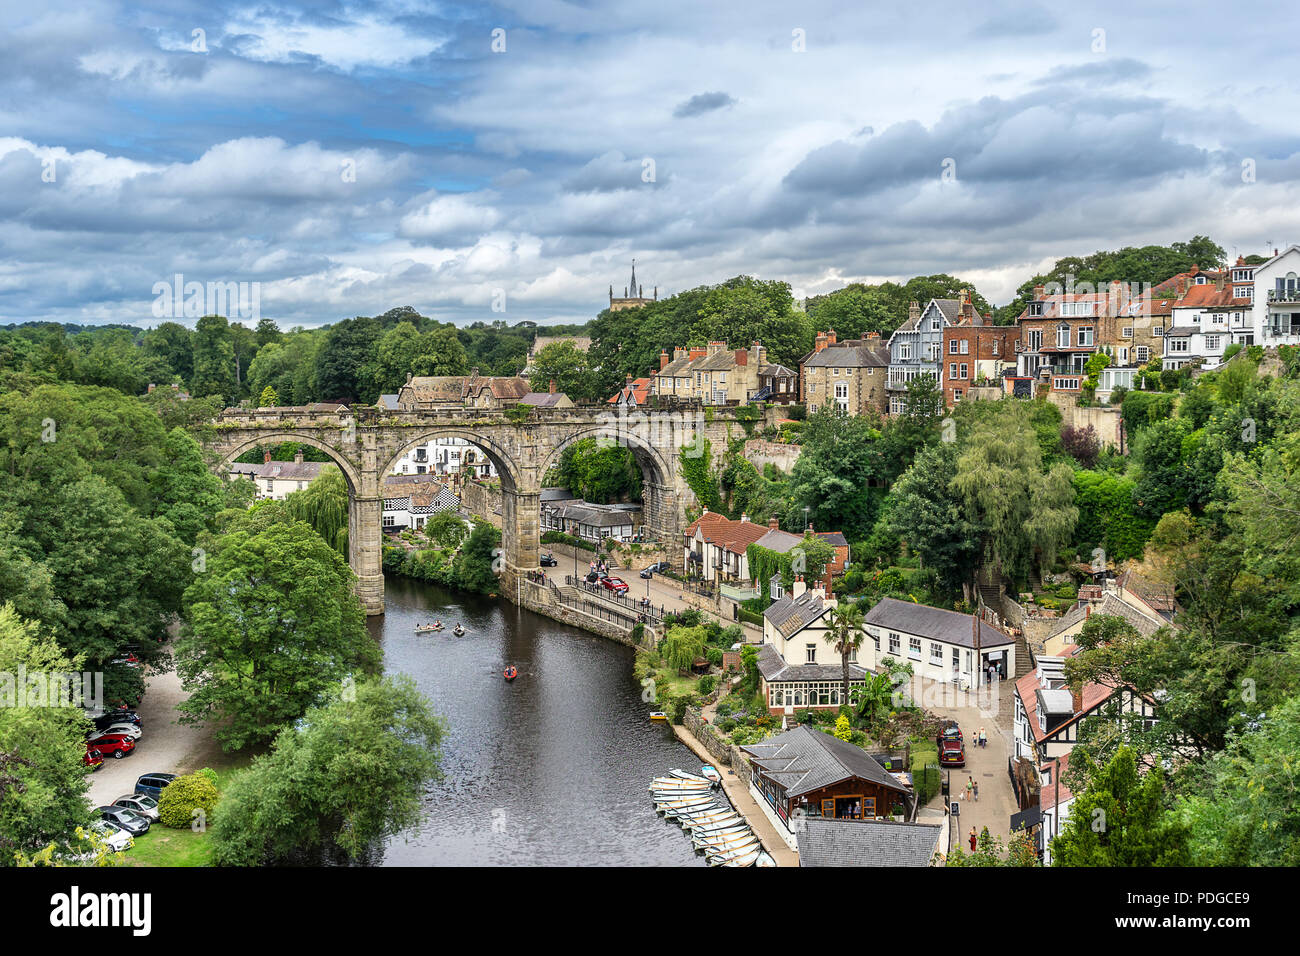 Looking down the River Nidd to the town of Knaresborough in Yorkshire England Stock Photo